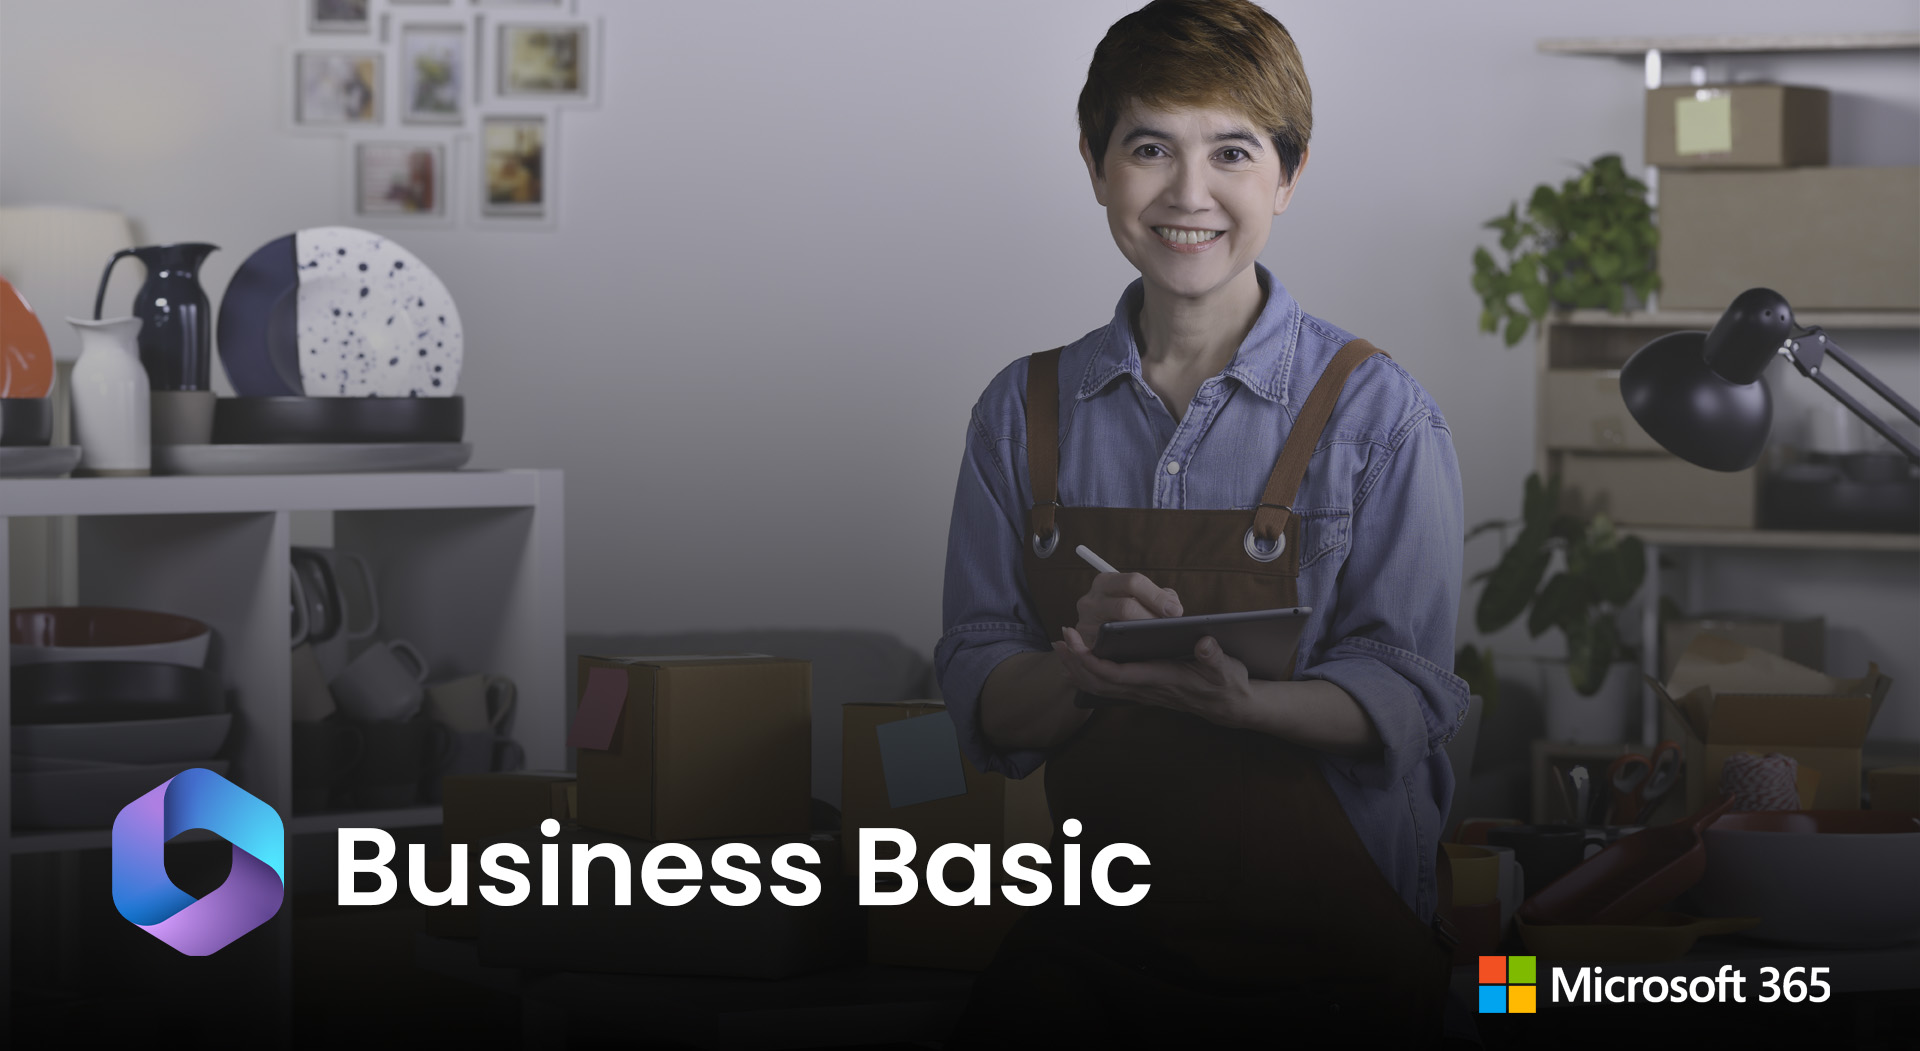 Microsoft 365 Business Basics for small businesses